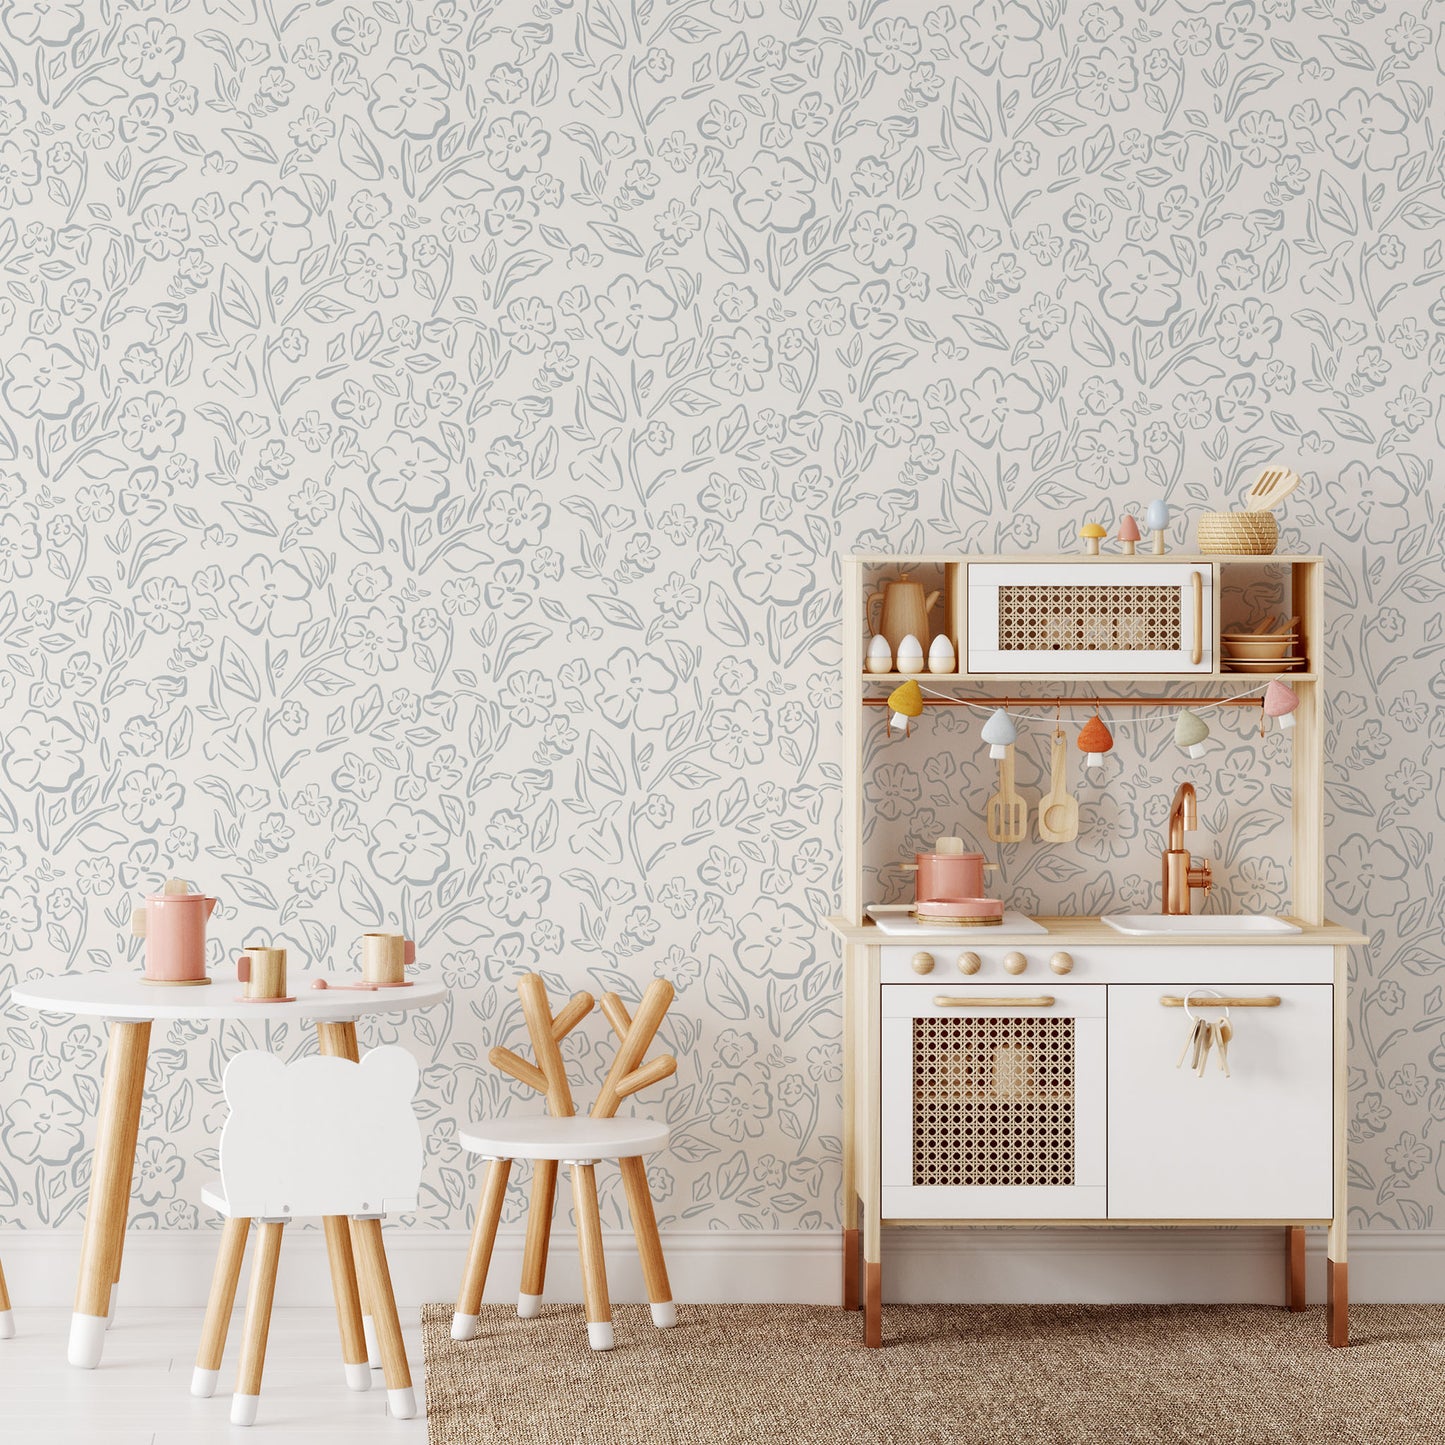 This Beverly Wallpaper in blue offers a stylish and feminine touch with its delicate floral design shown in full size image.